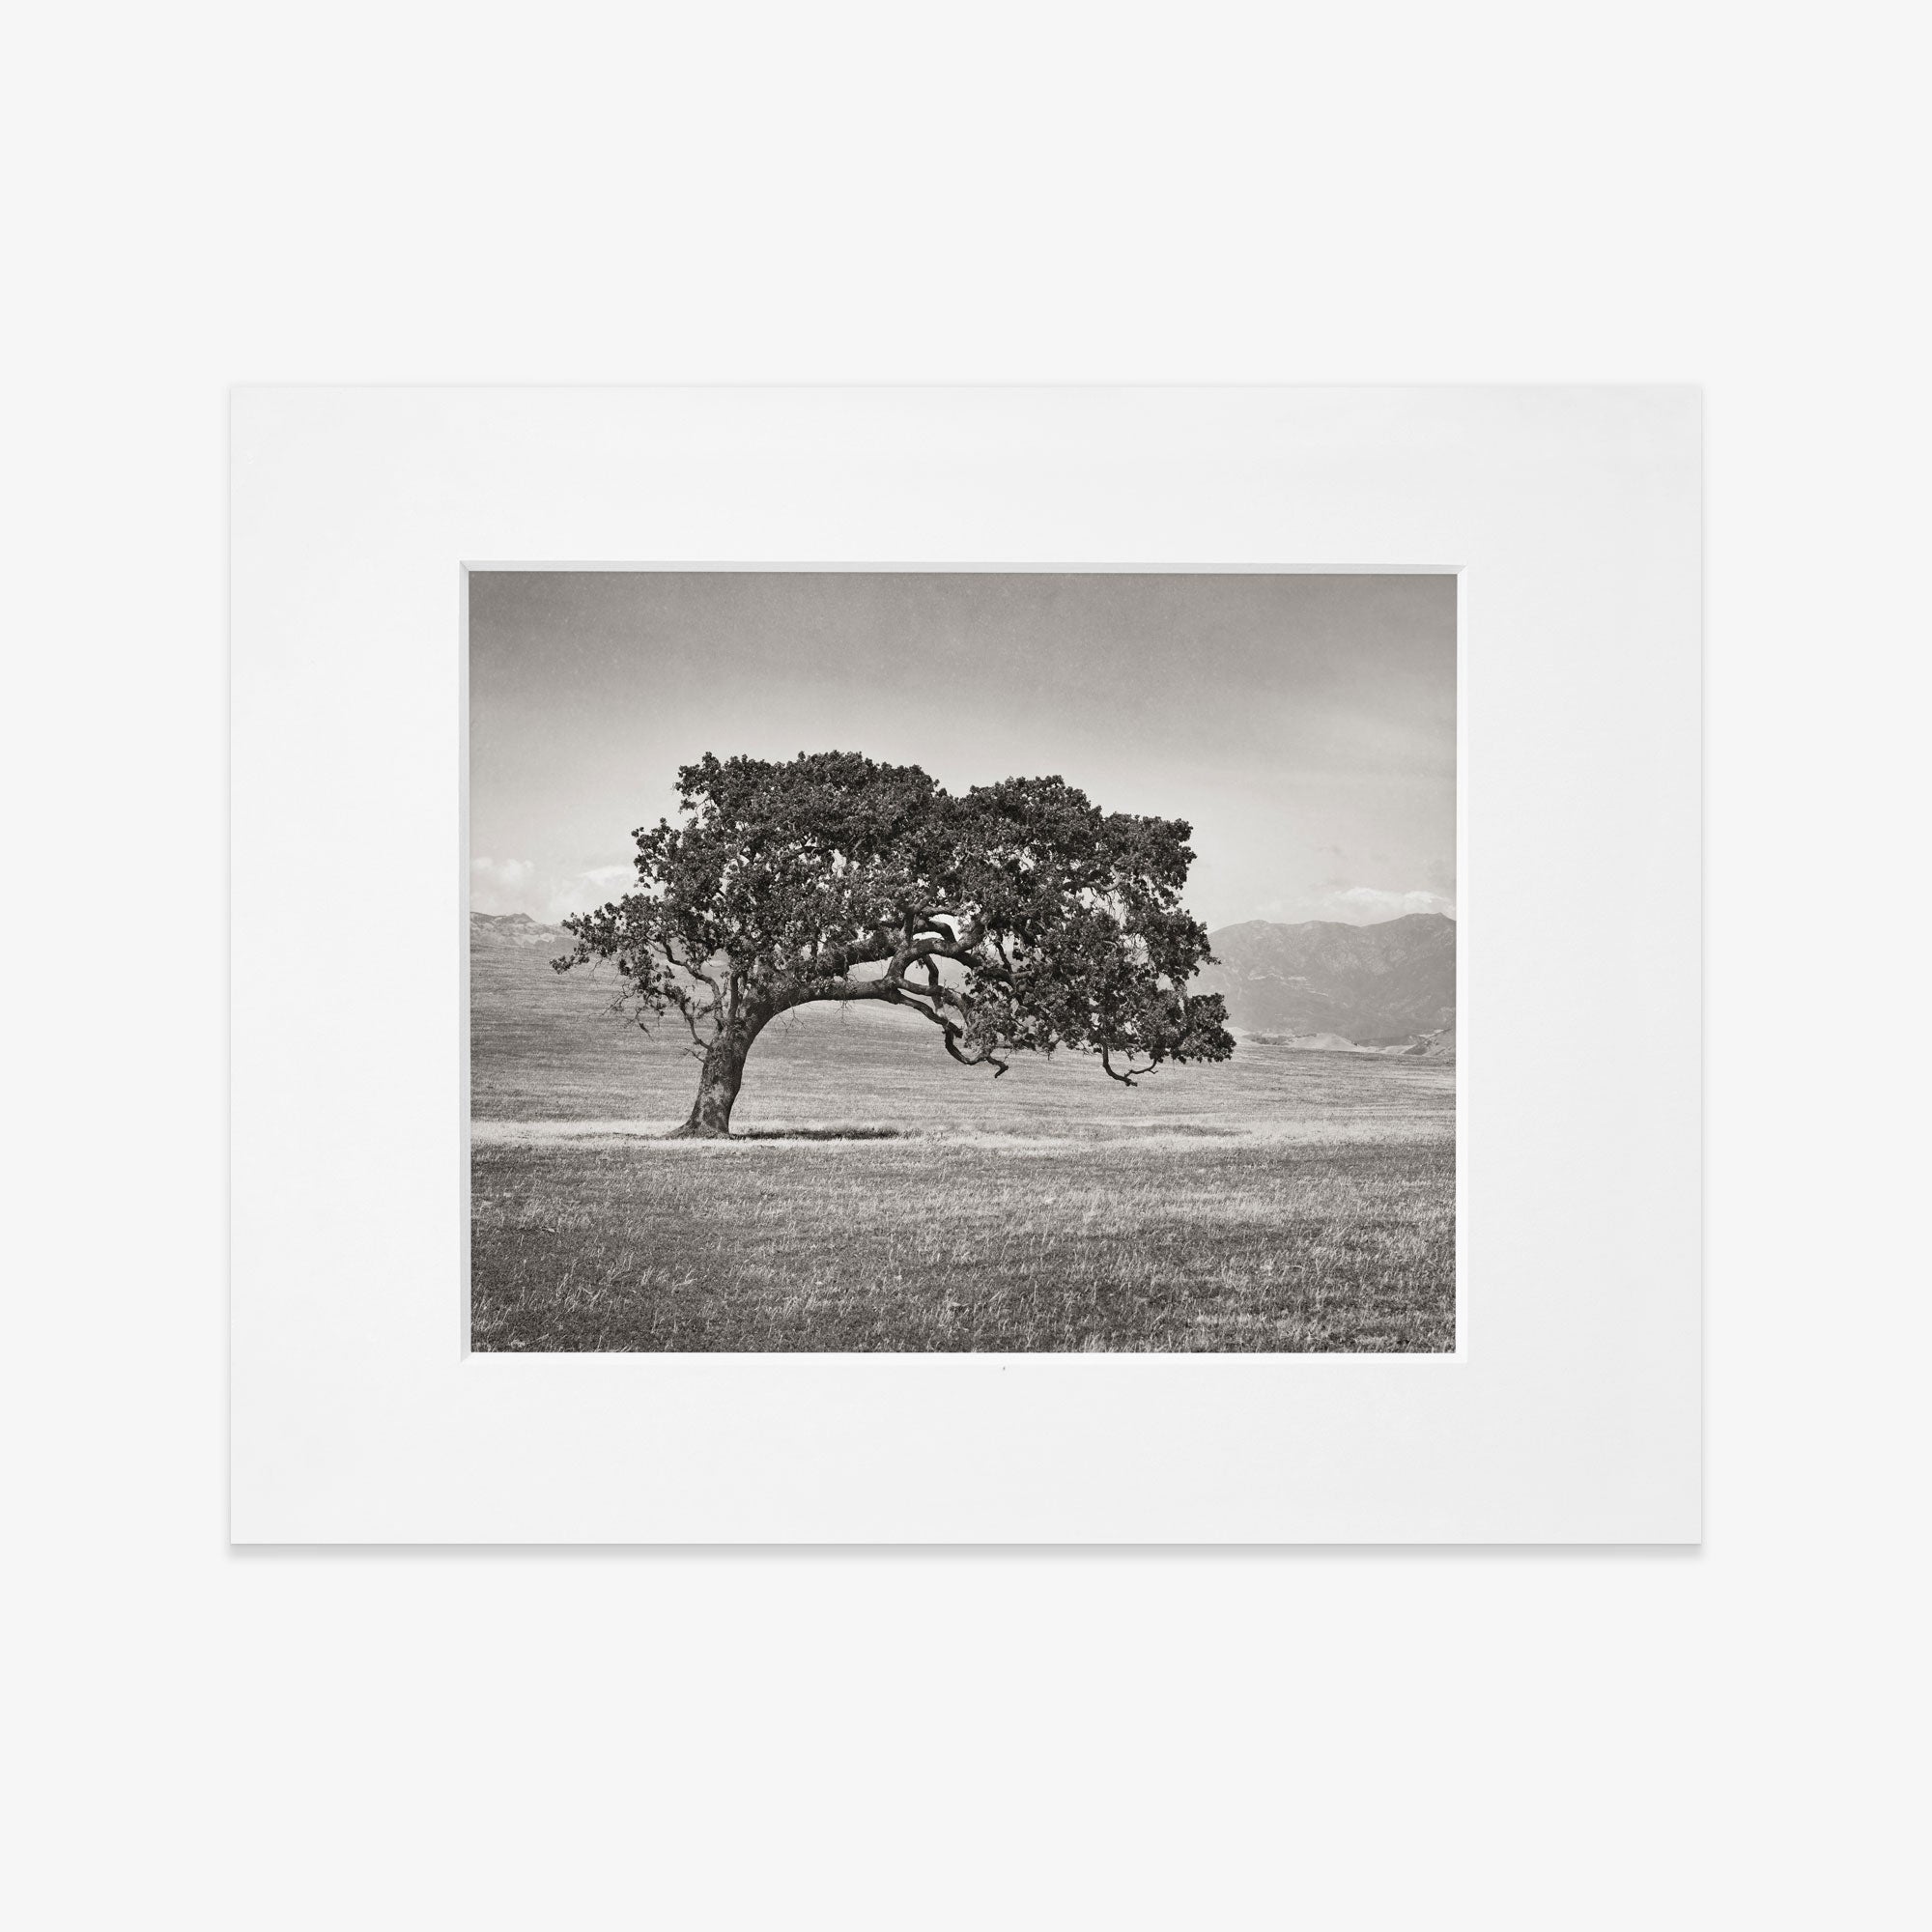 Offley Green&#39;s &#39;Windswept (Black and White)&#39; features a Black and white photograph of a solitary, sprawling Californian Oak in a grassy field with distant mountains in the background, framed with a wide white border.